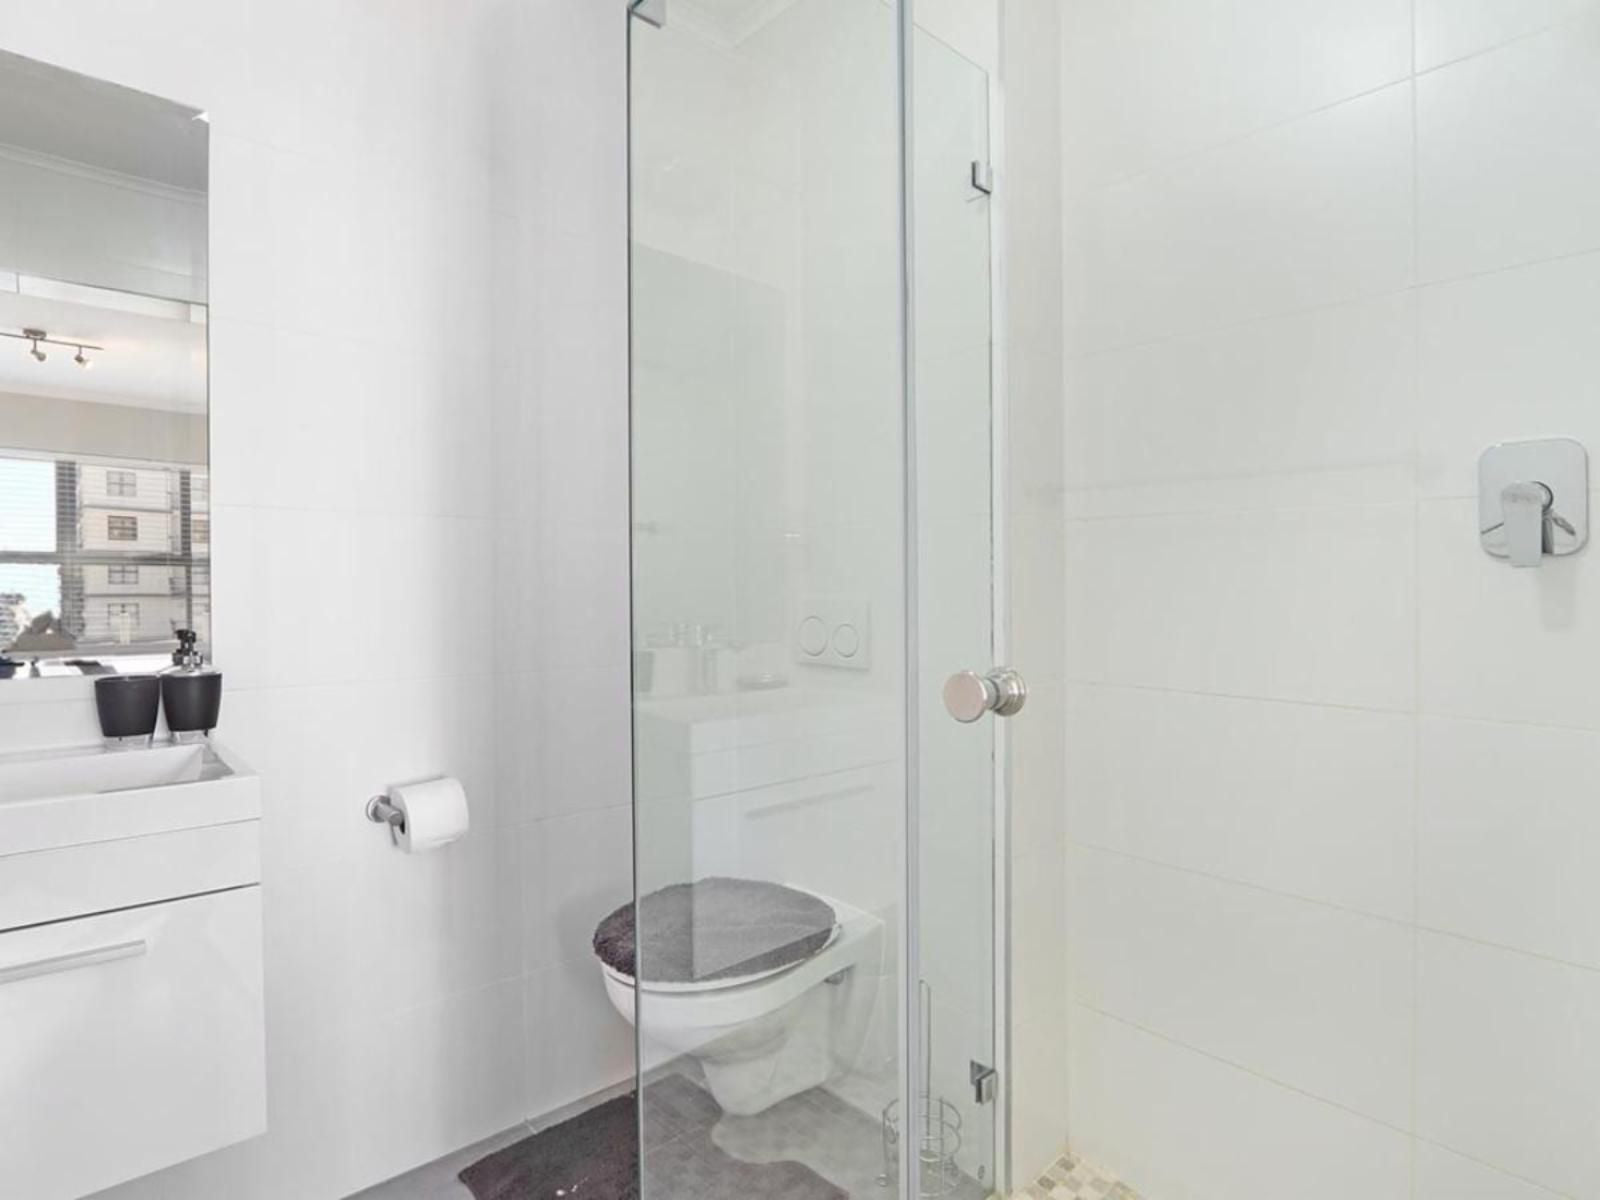 The Paragon 317 By Hostagents Observatory Cape Town Western Cape South Africa Colorless, Bathroom